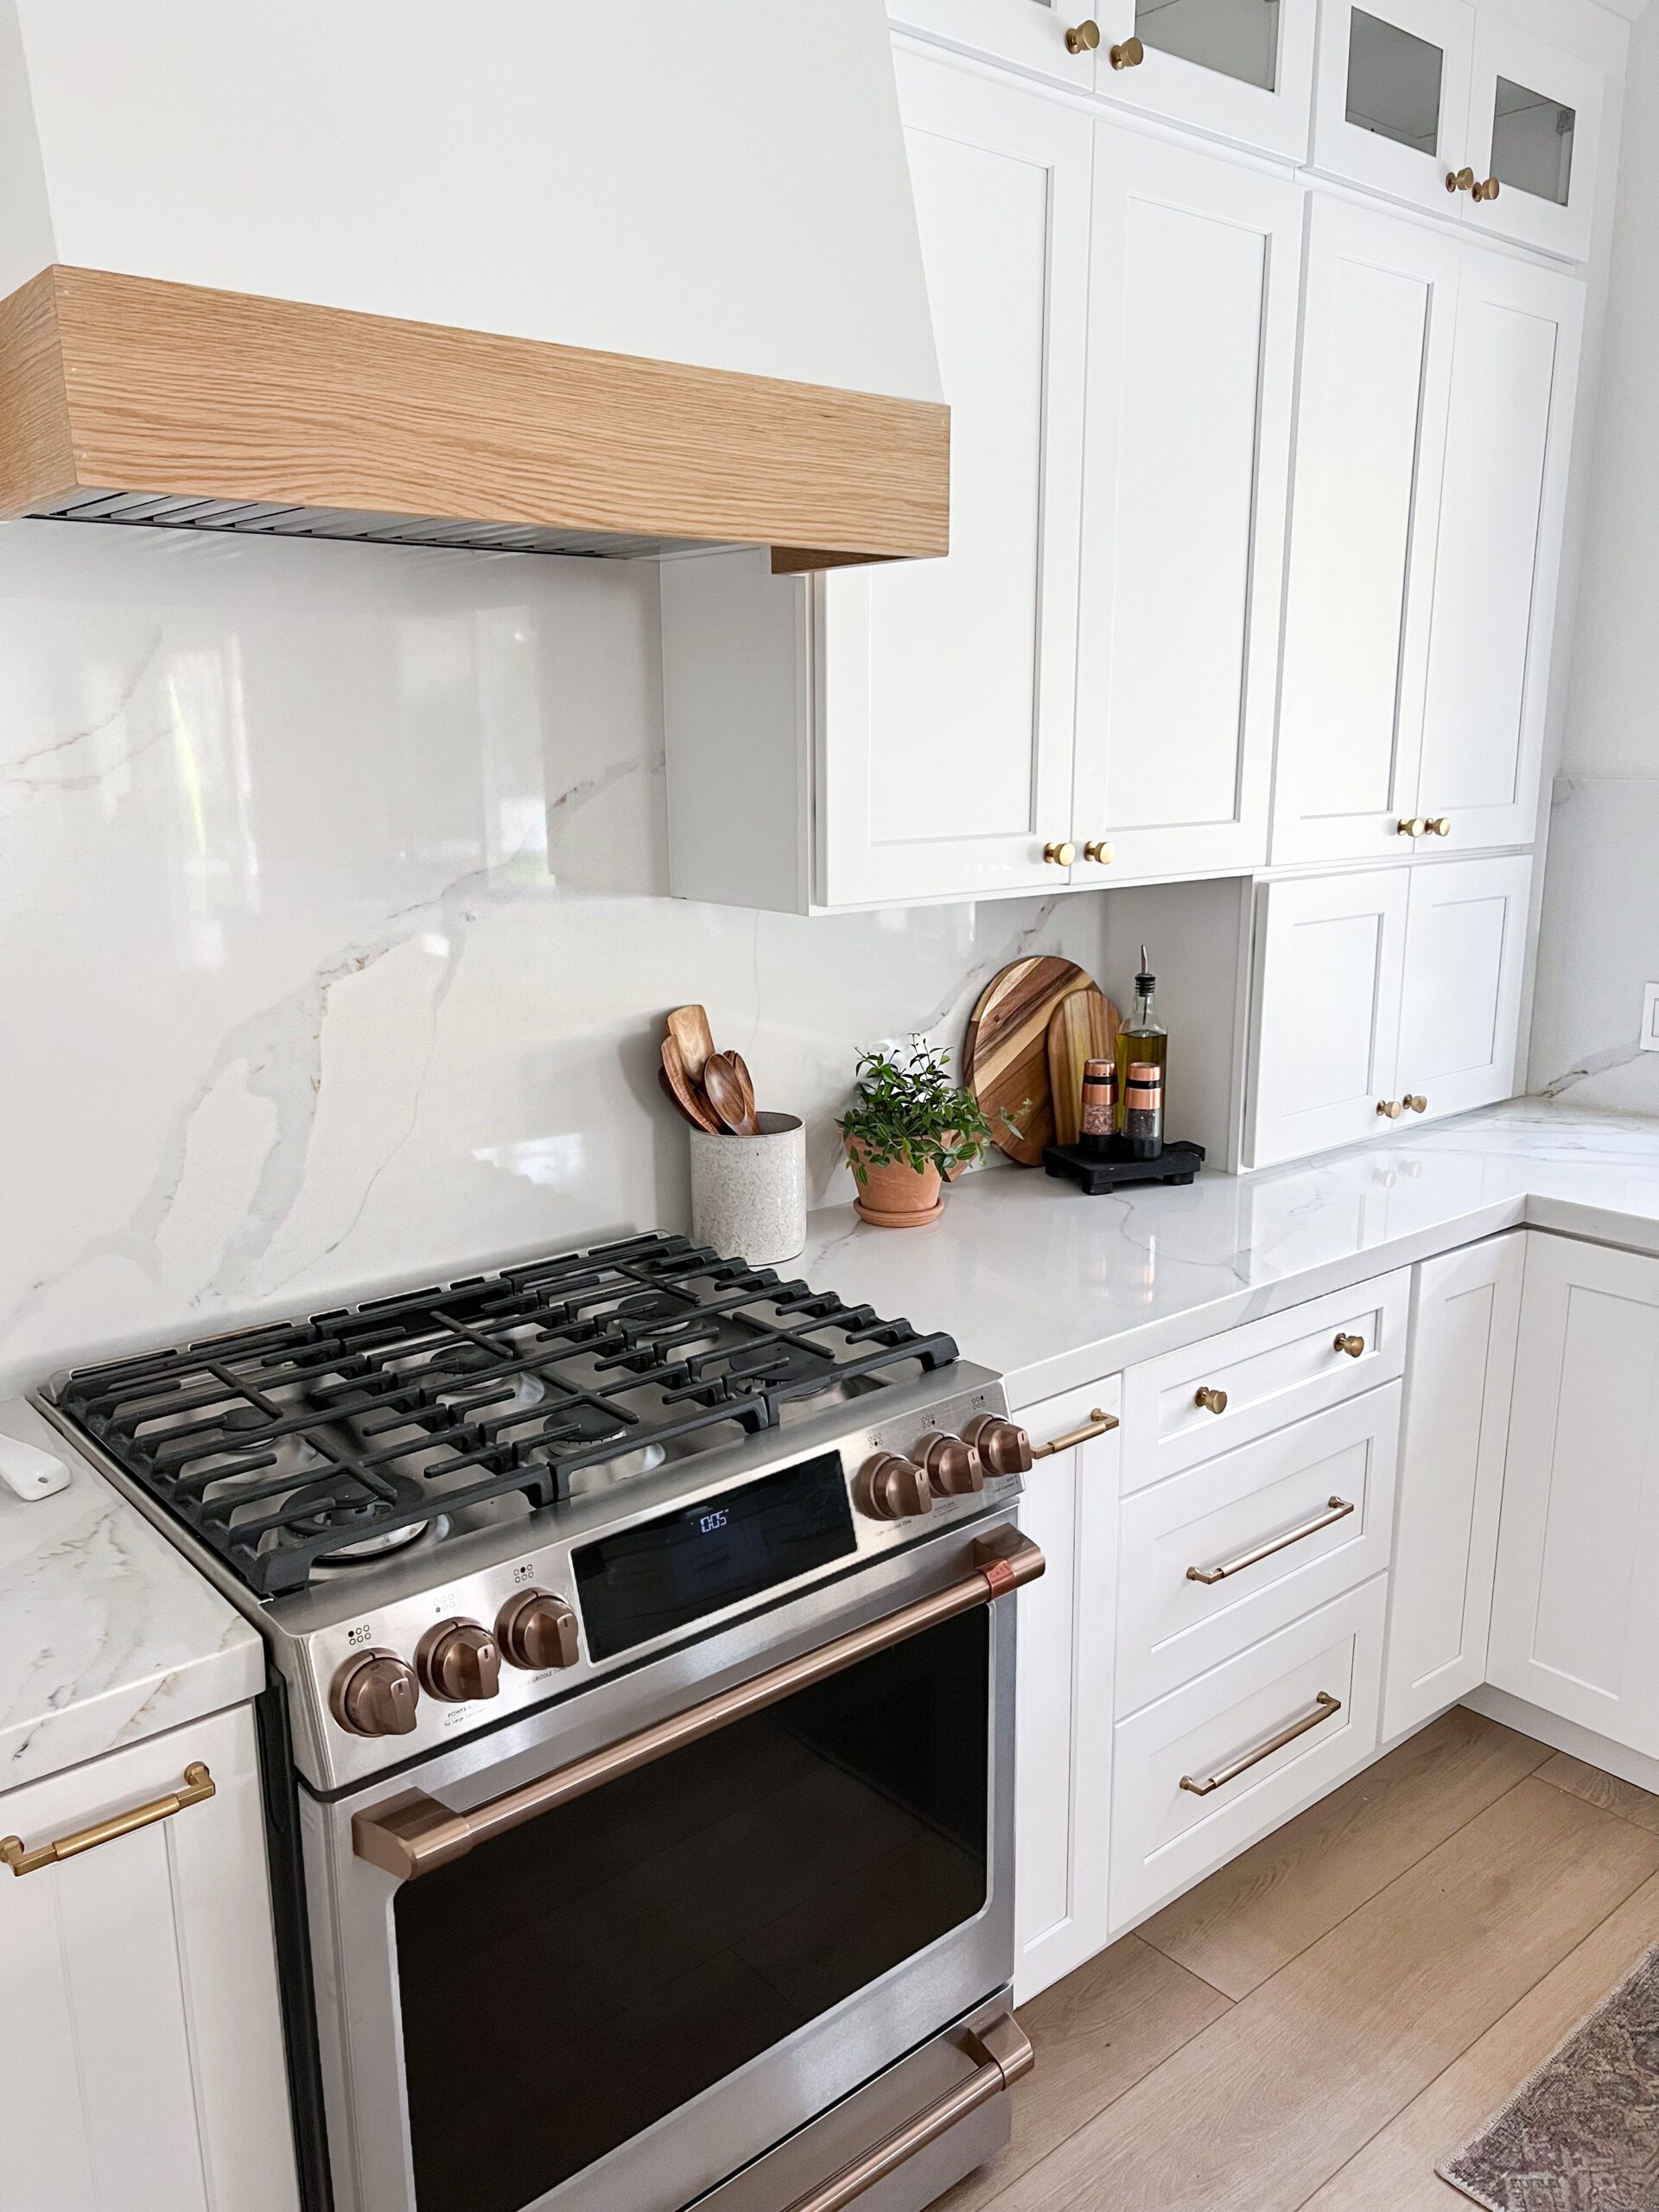 Pairings of Gold Kitchen Hardware with Stainless Appliances插图3